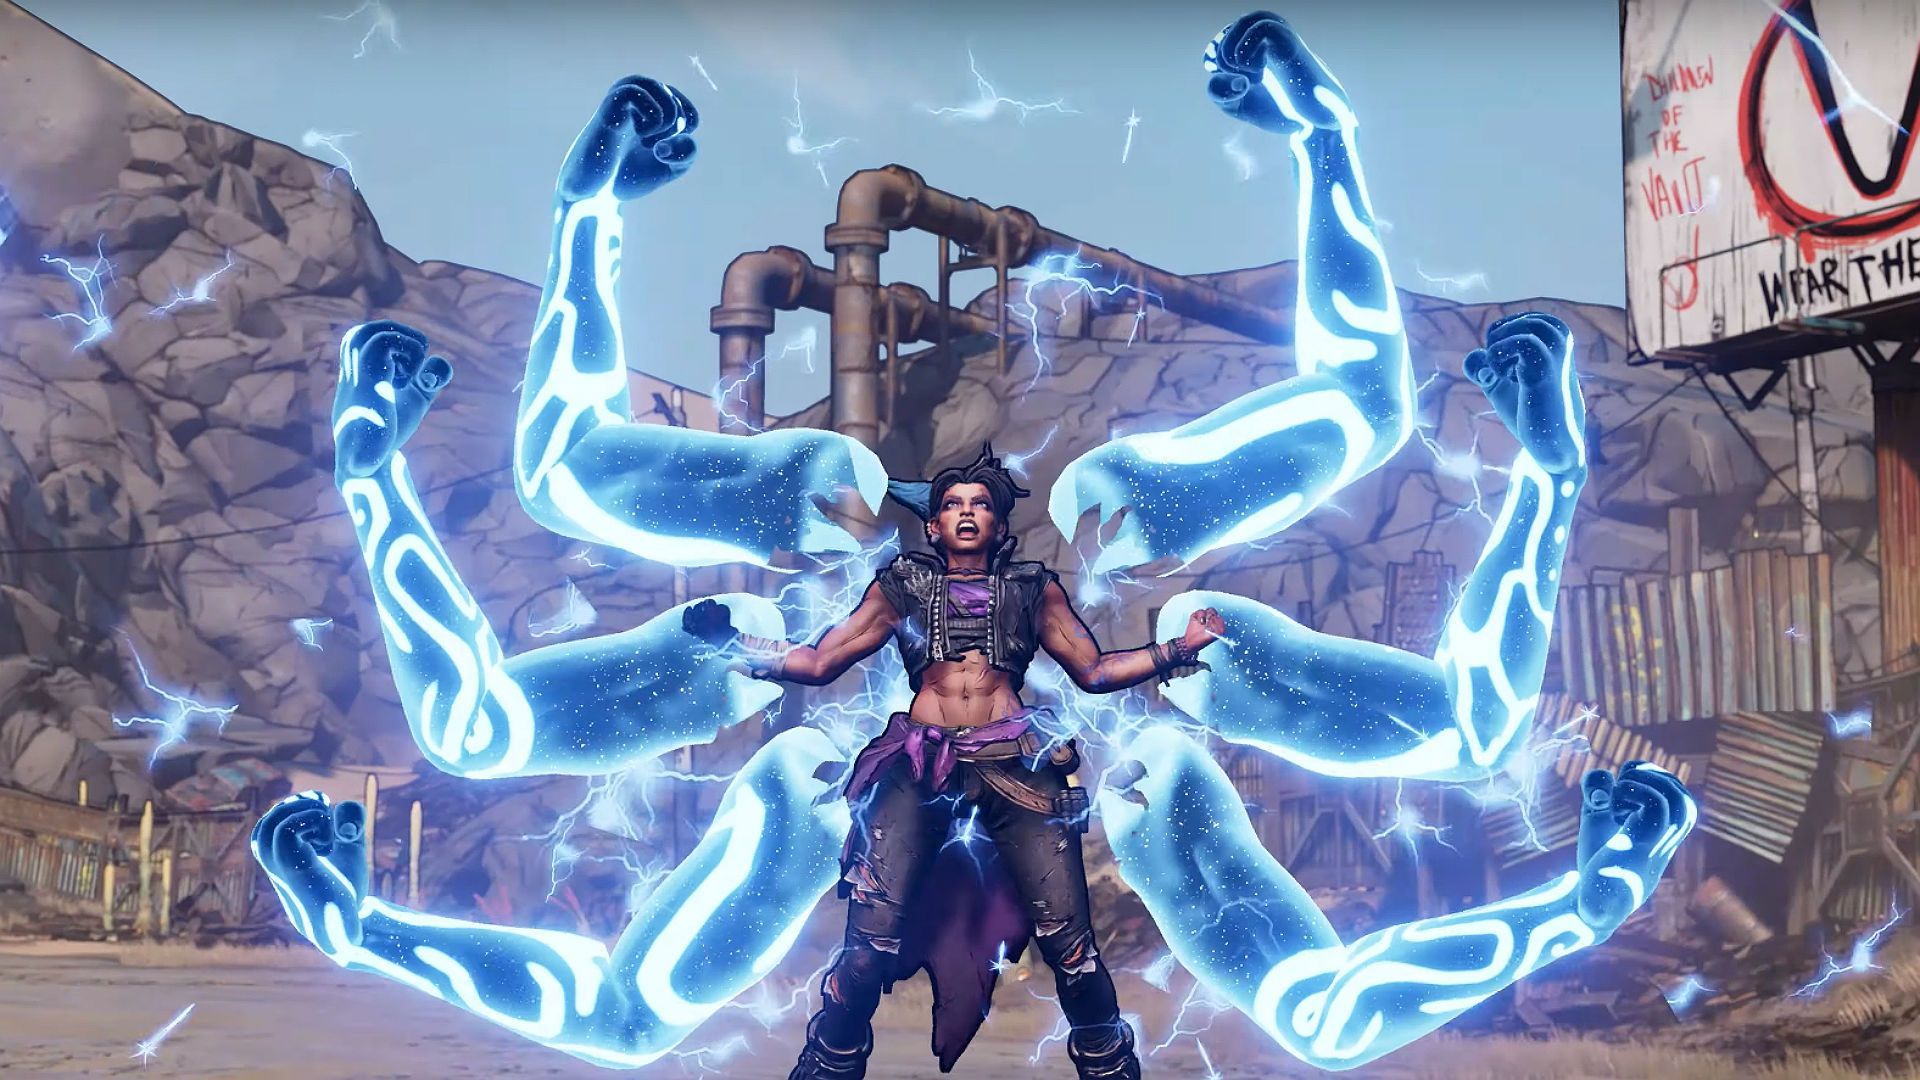 Borderlands 3 could appear on Google Stadia and Project xCloud image 1